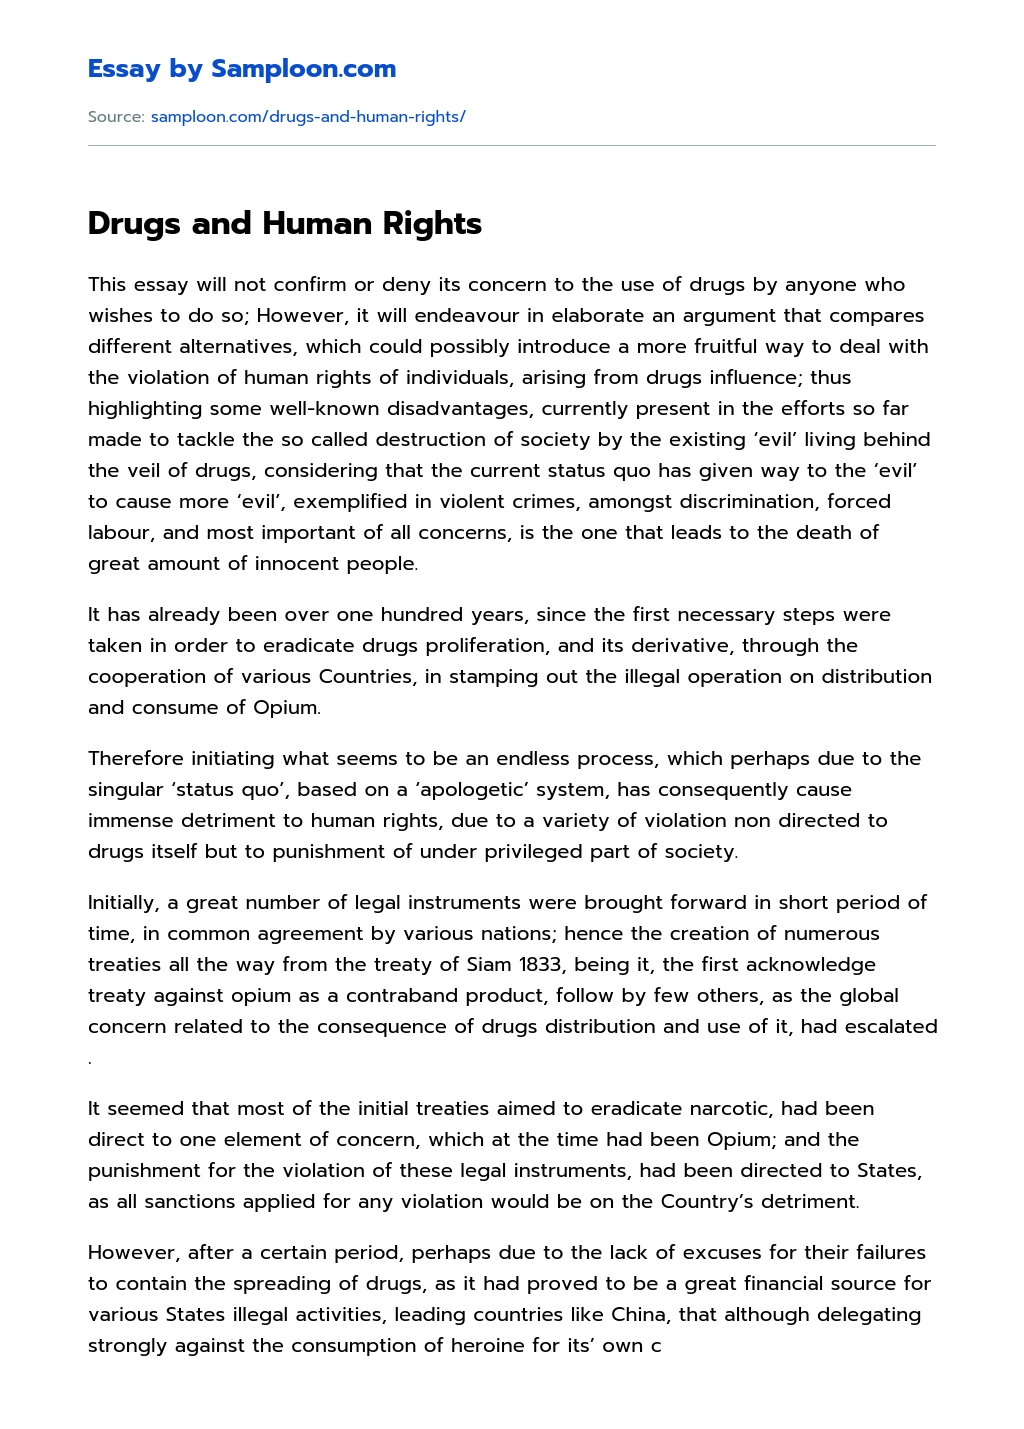 Drugs and Human Rights essay